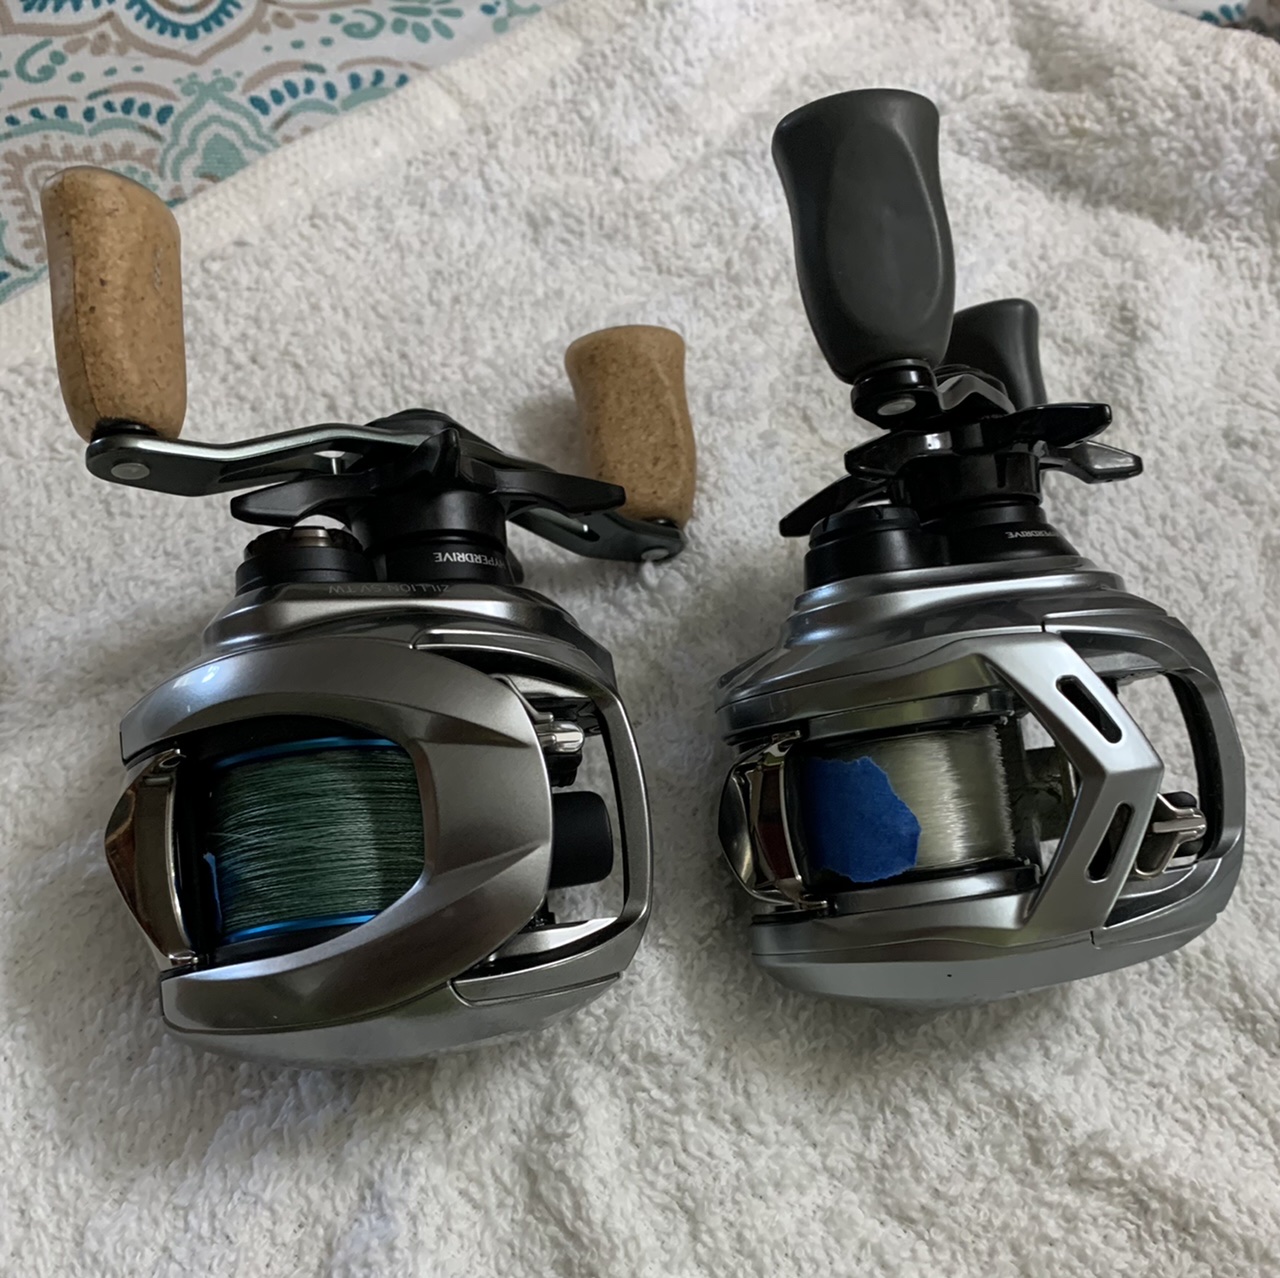 Daiwa Zillion SV TW 20 Question - Fishing Rods, Reels, Line, and Knots -  Bass Fishing Forums